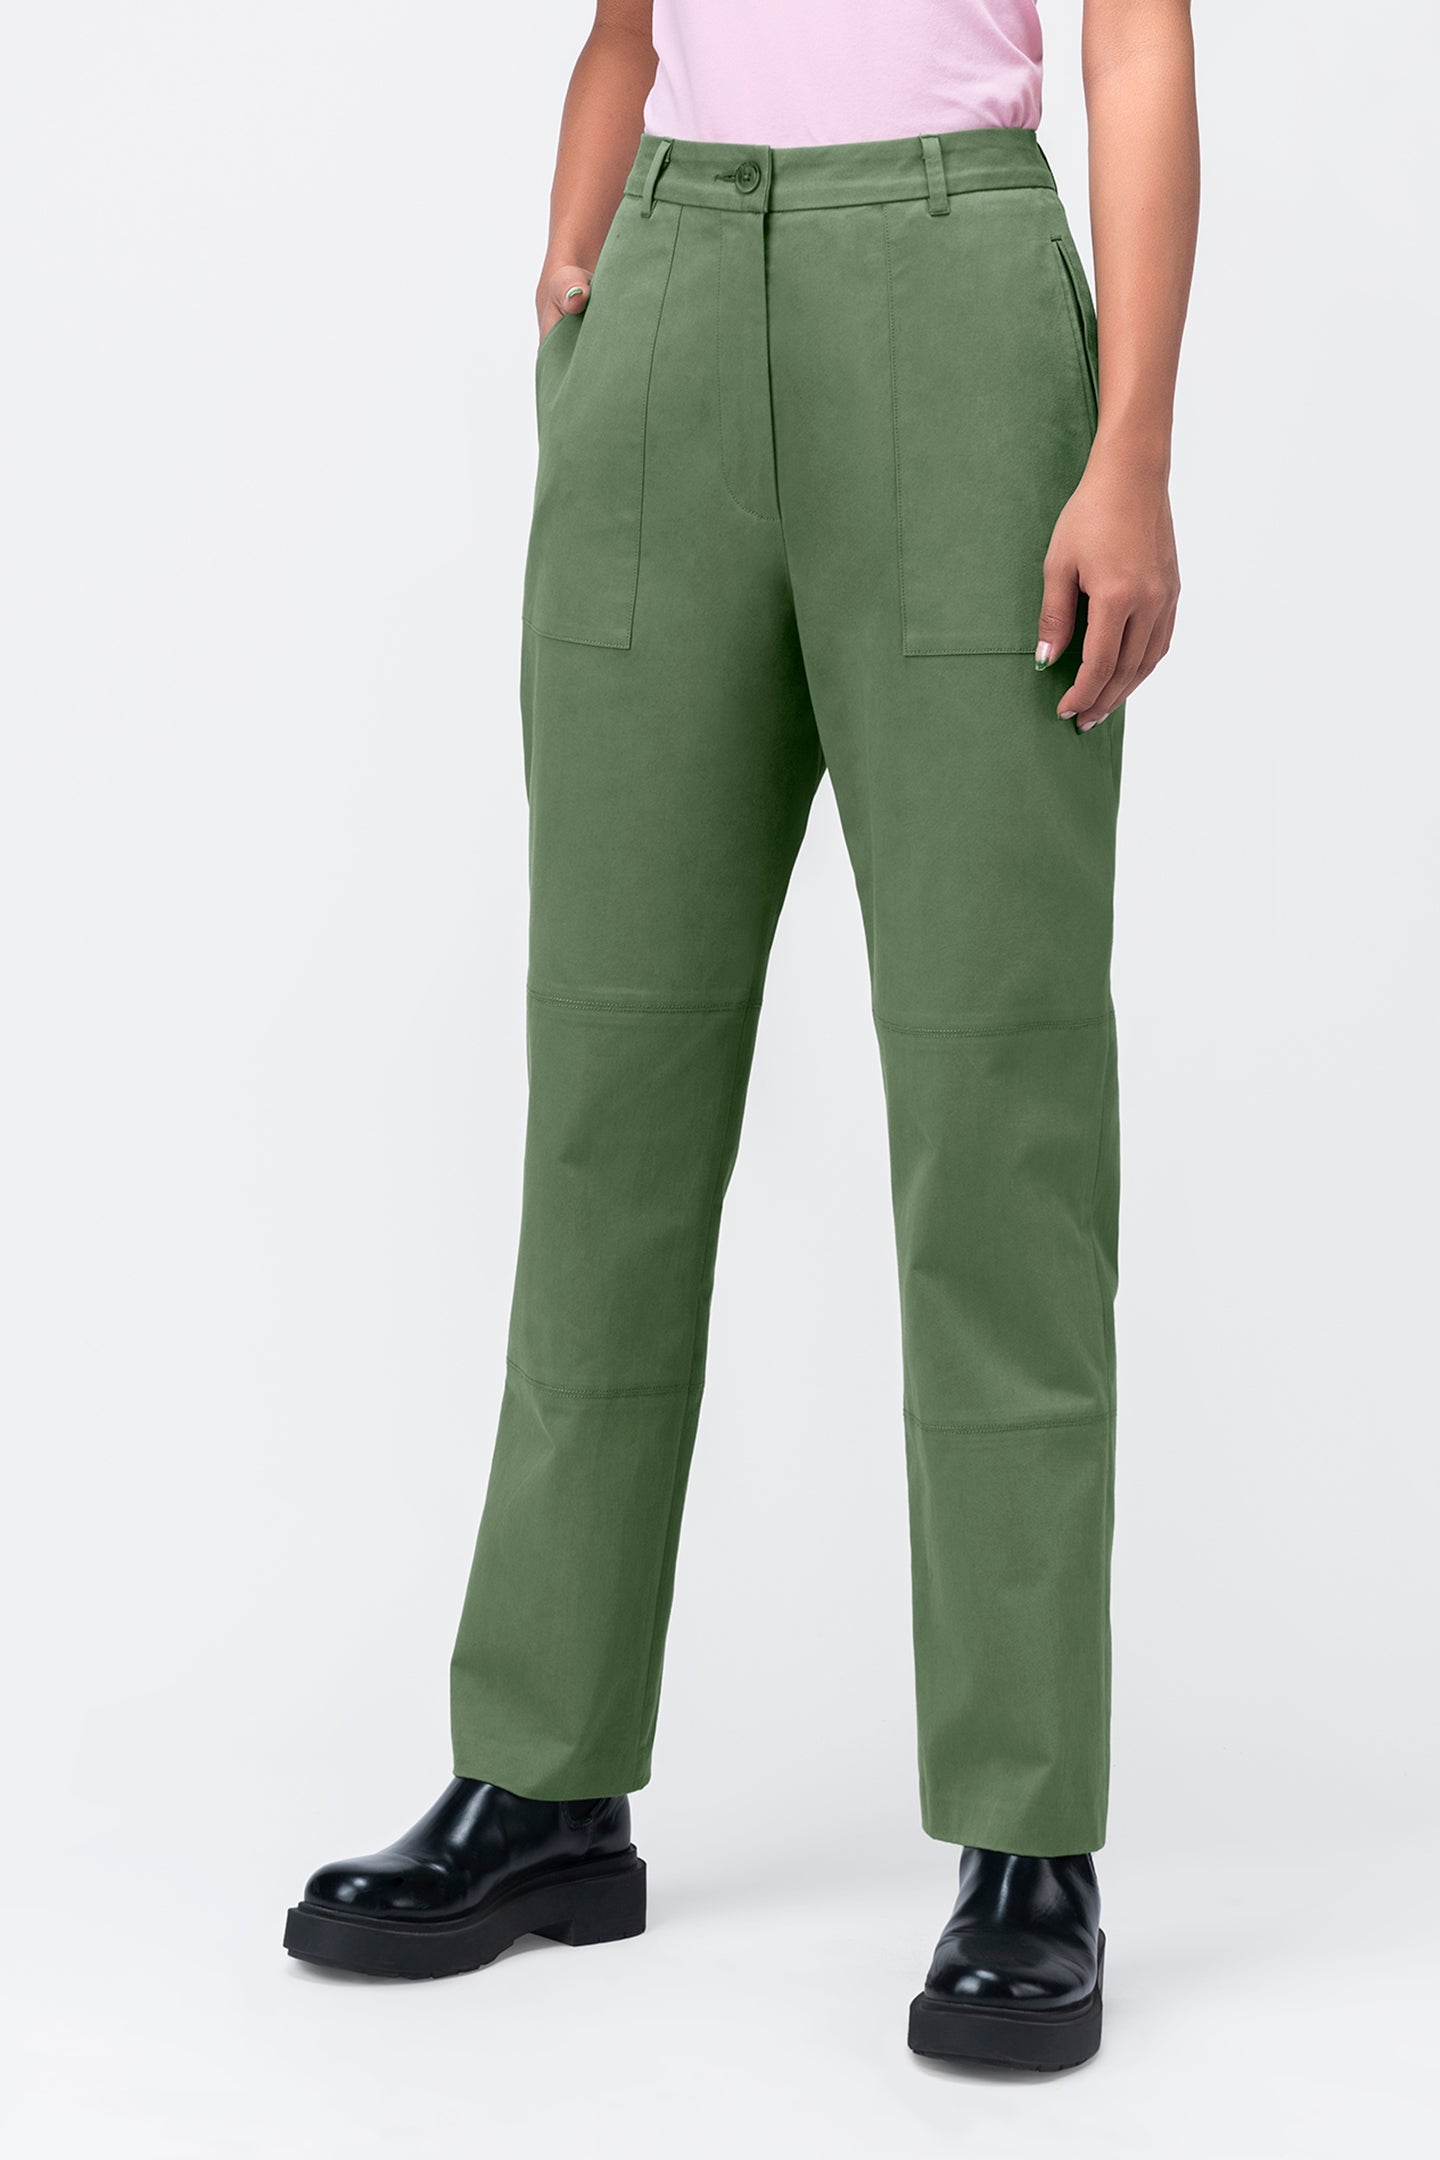 Womens Trousers Buy Ladies Pants Online at Best Prices in India  STREET  NINE FASHIONS